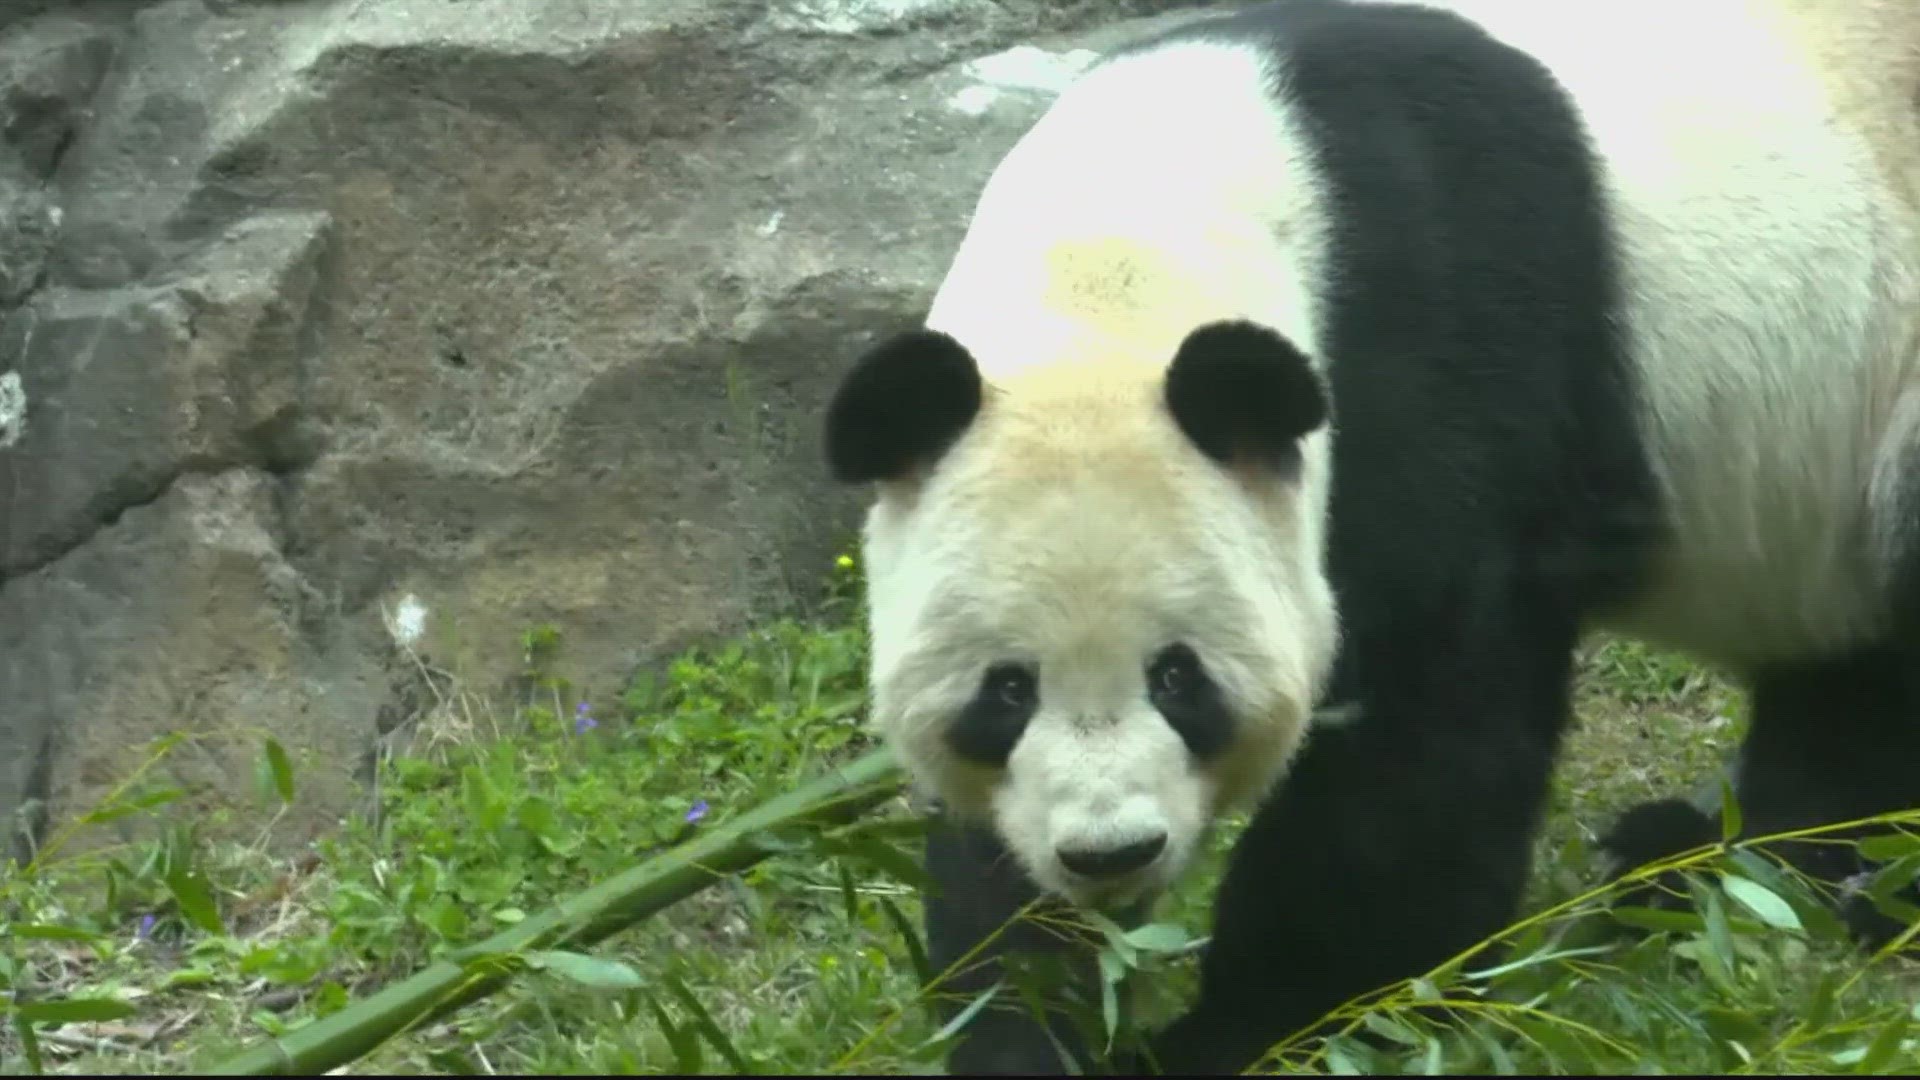 Yes, all zoo pandas in the U.S. are being returned to China in November ...